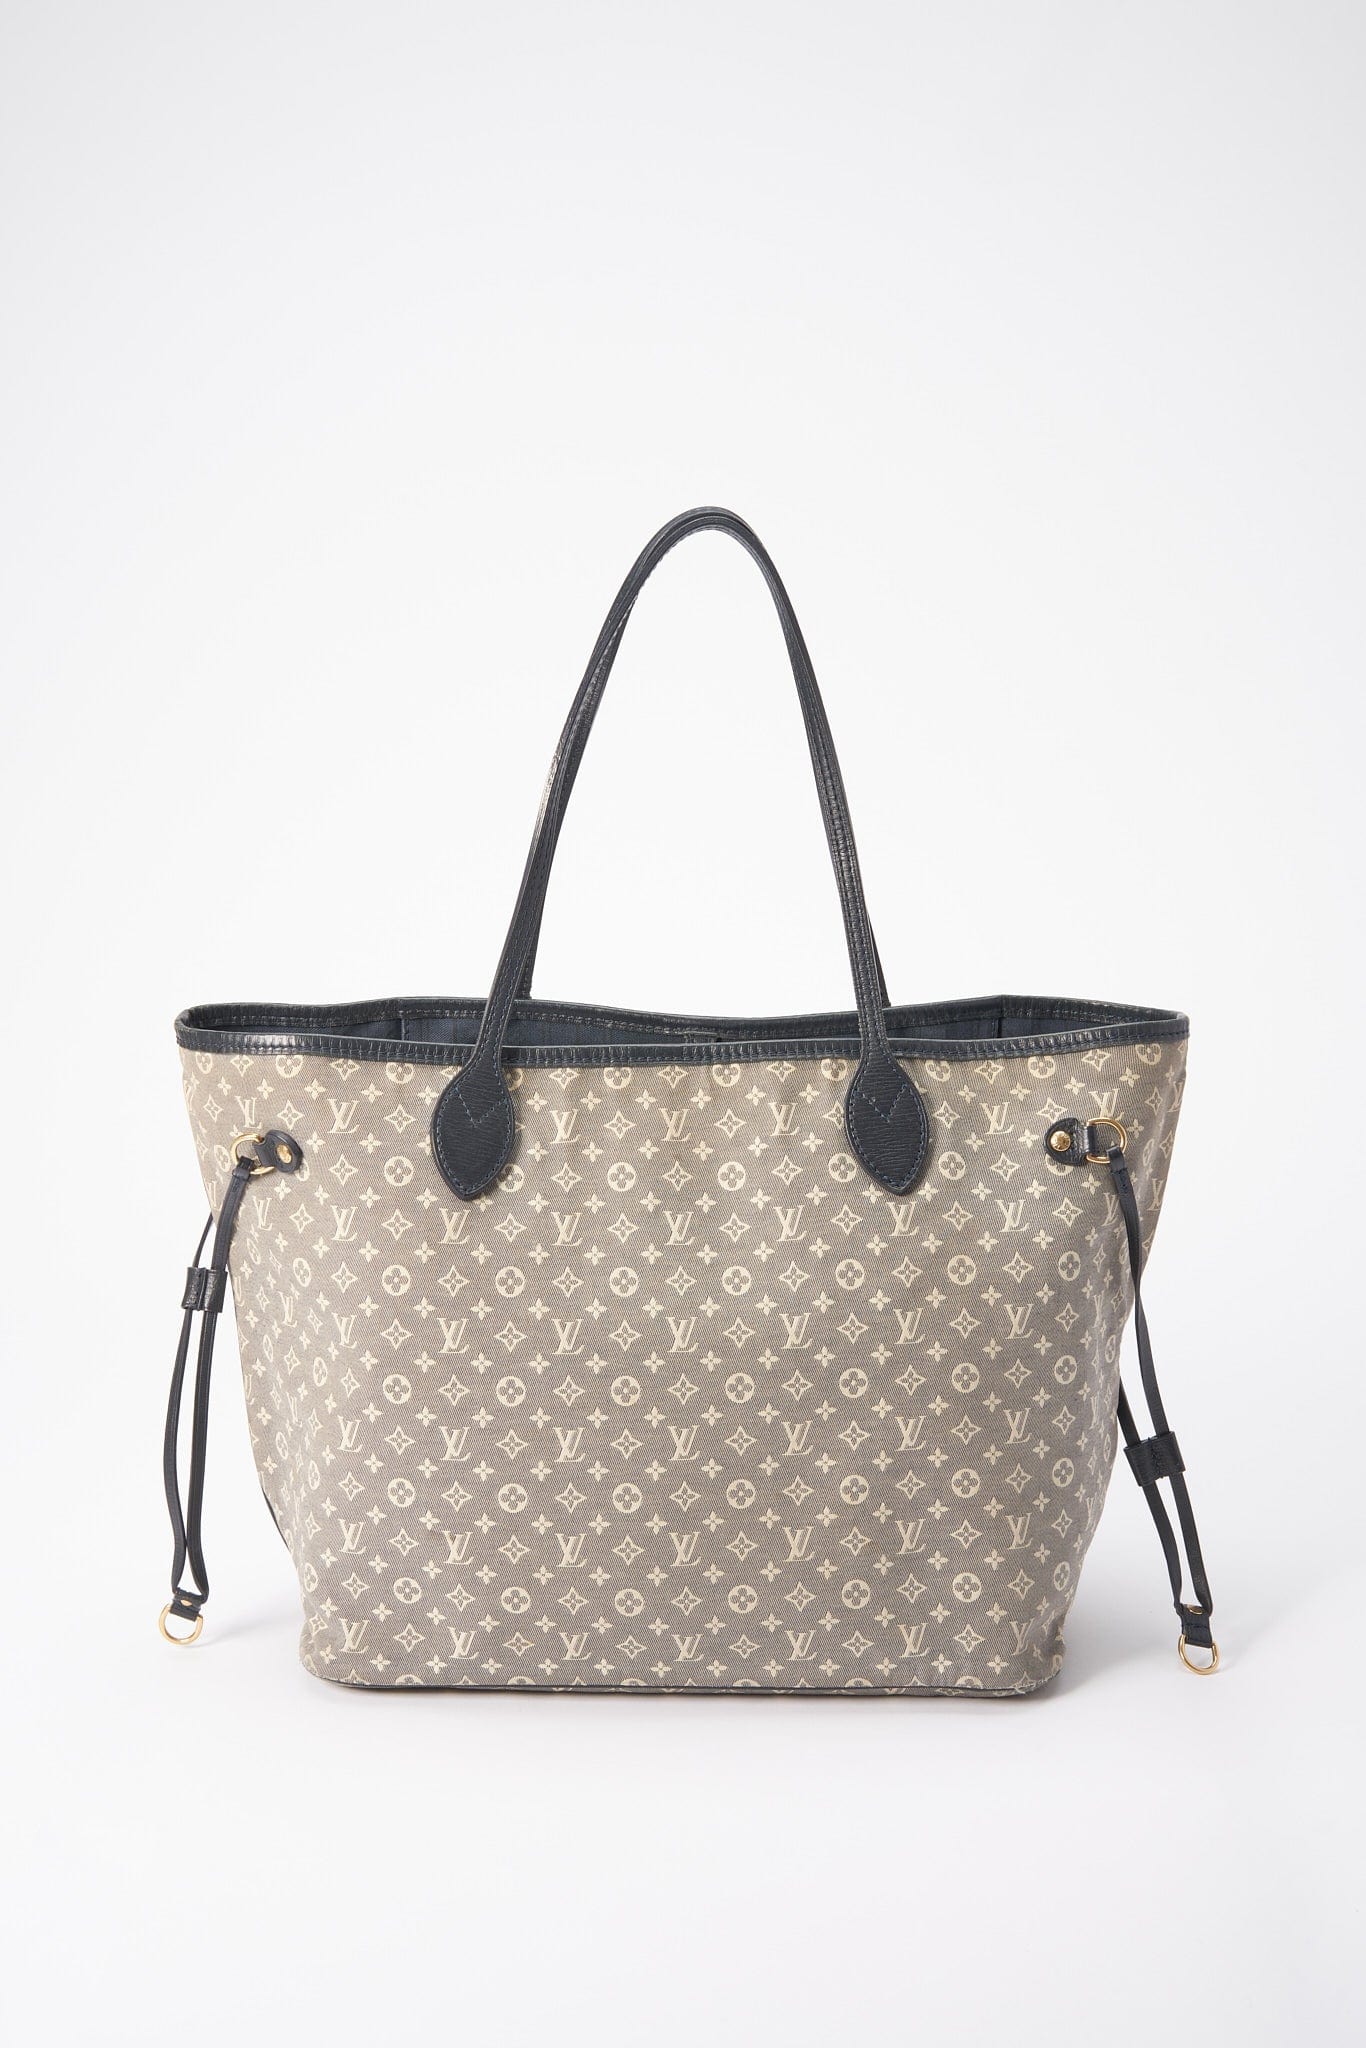 Louis Vuitton Neverfull mm, Navy, One Size